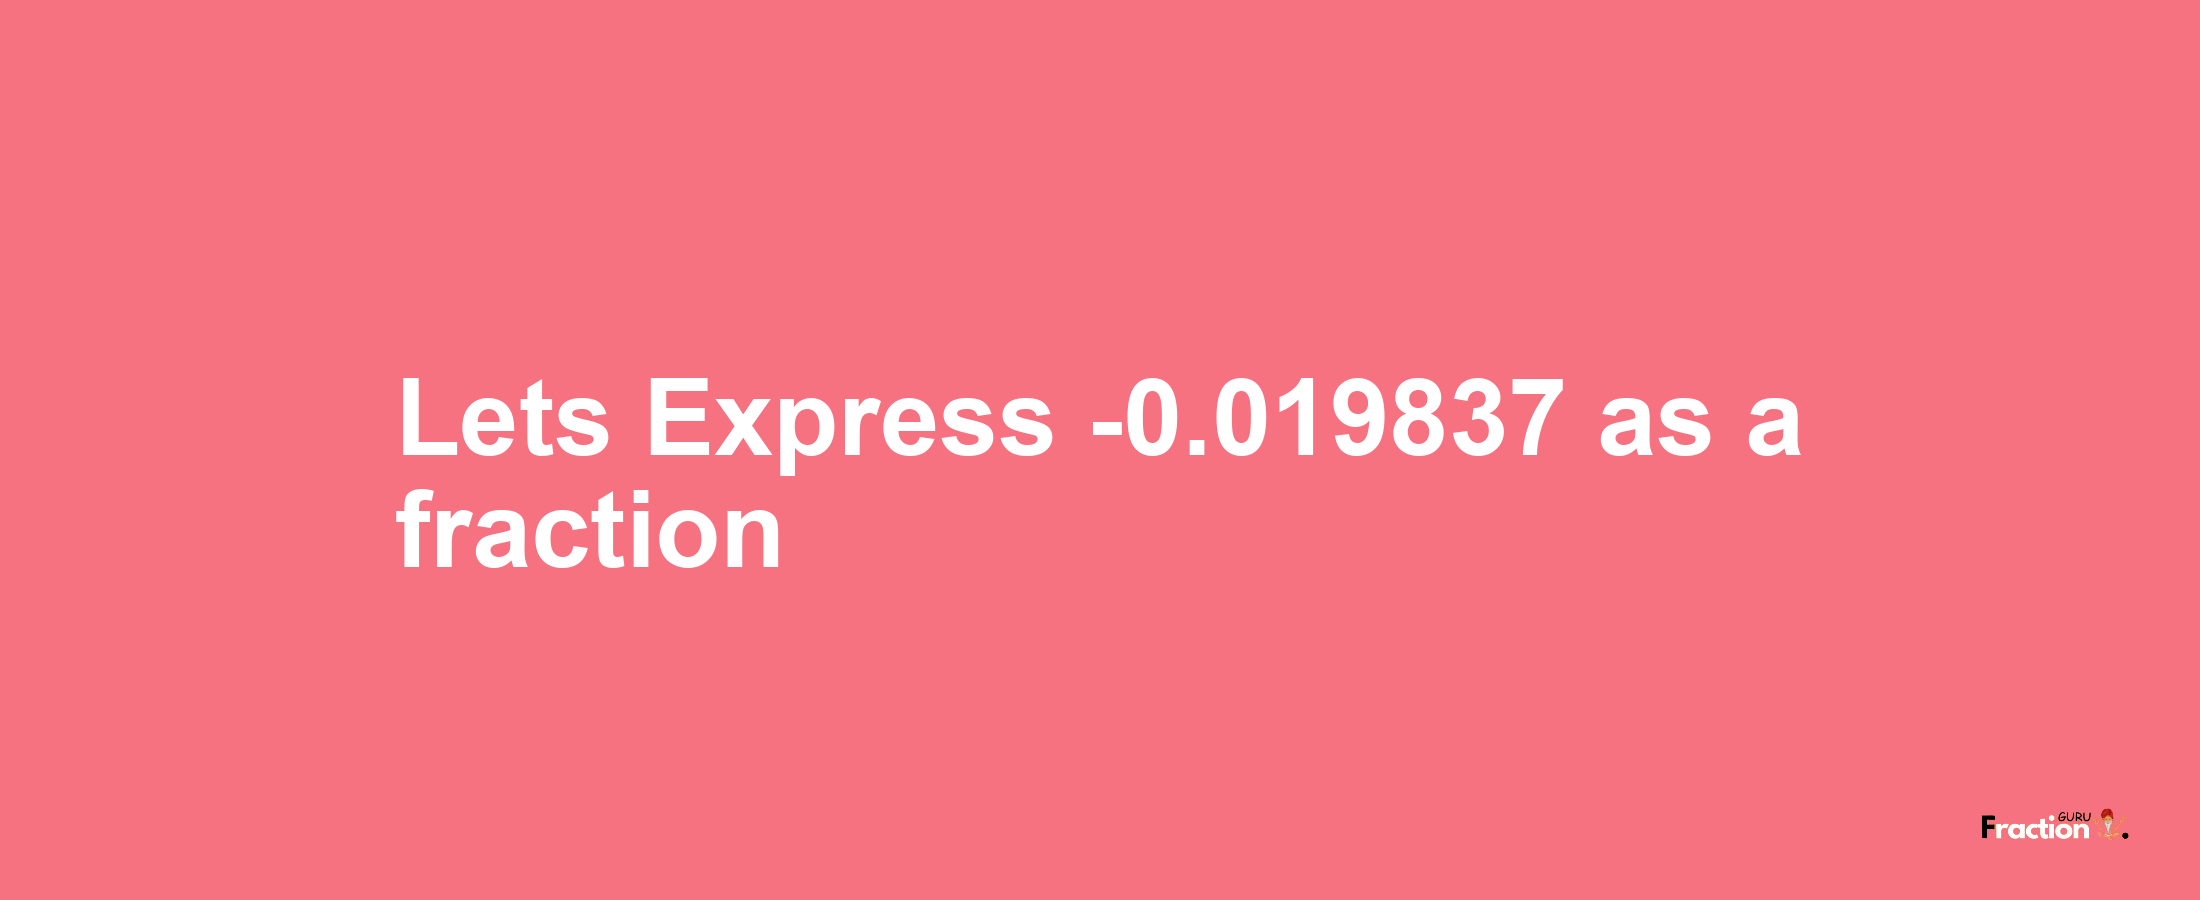 Lets Express -0.019837 as afraction